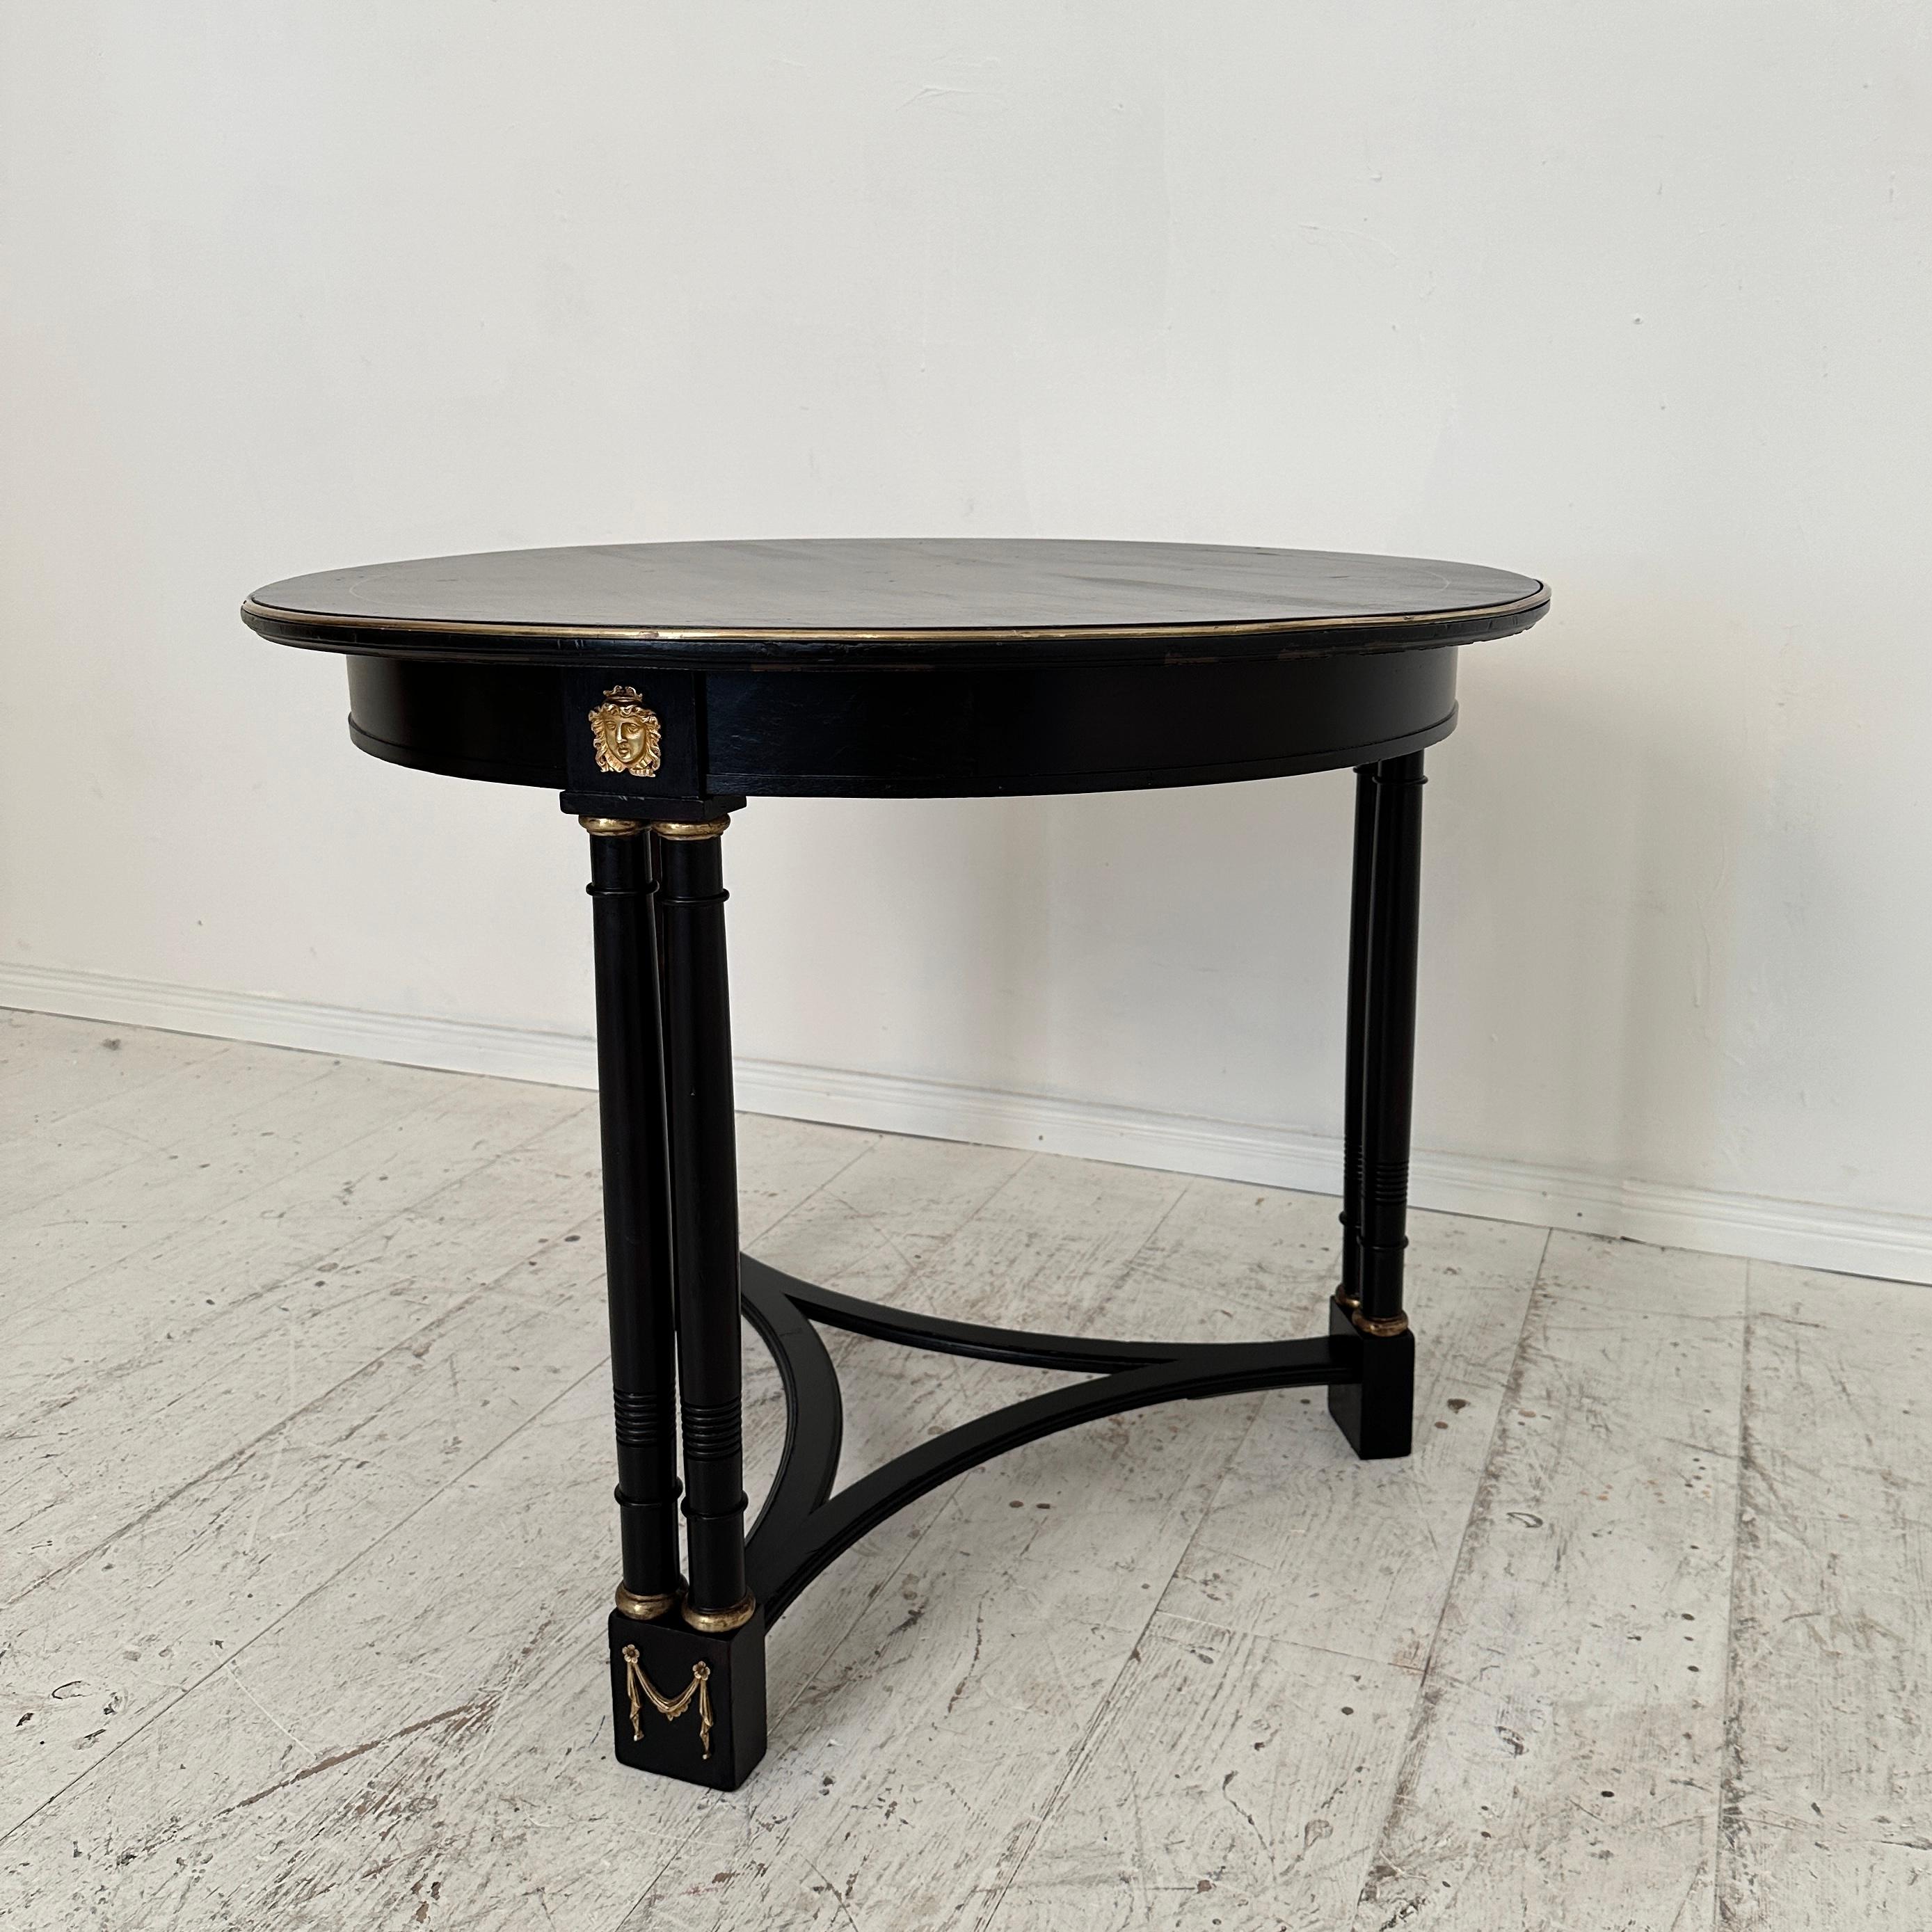 Late 19th Century 19th Century Black Round Gueridon Empire Style Table, around 1870 For Sale